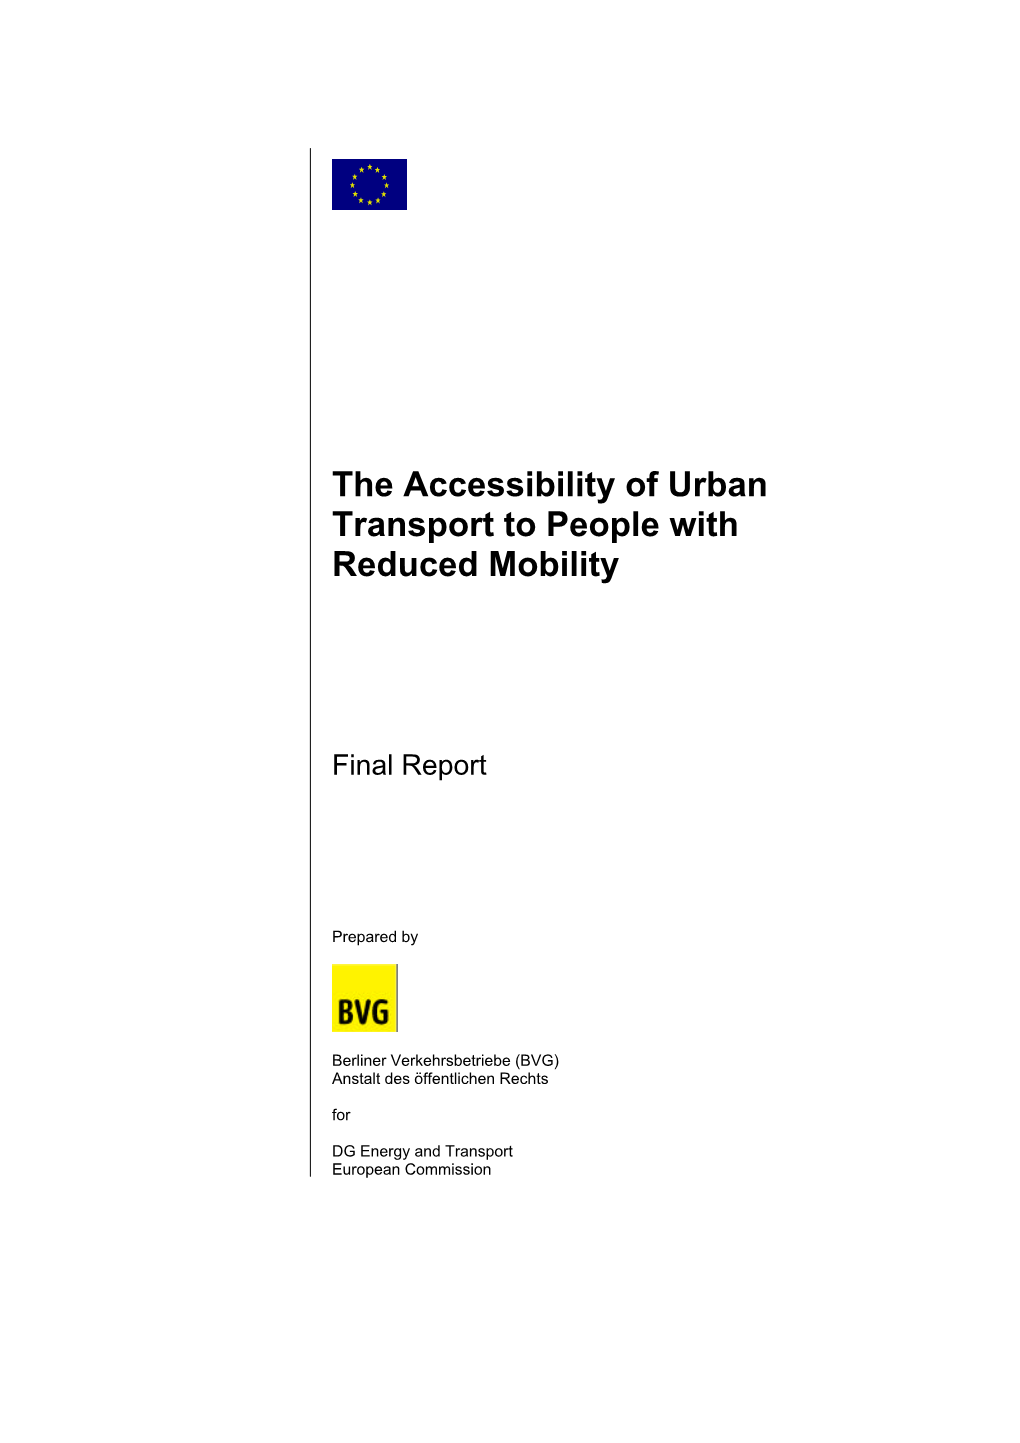 The Accessibility of Urban Transport to People with Reduced Mobility